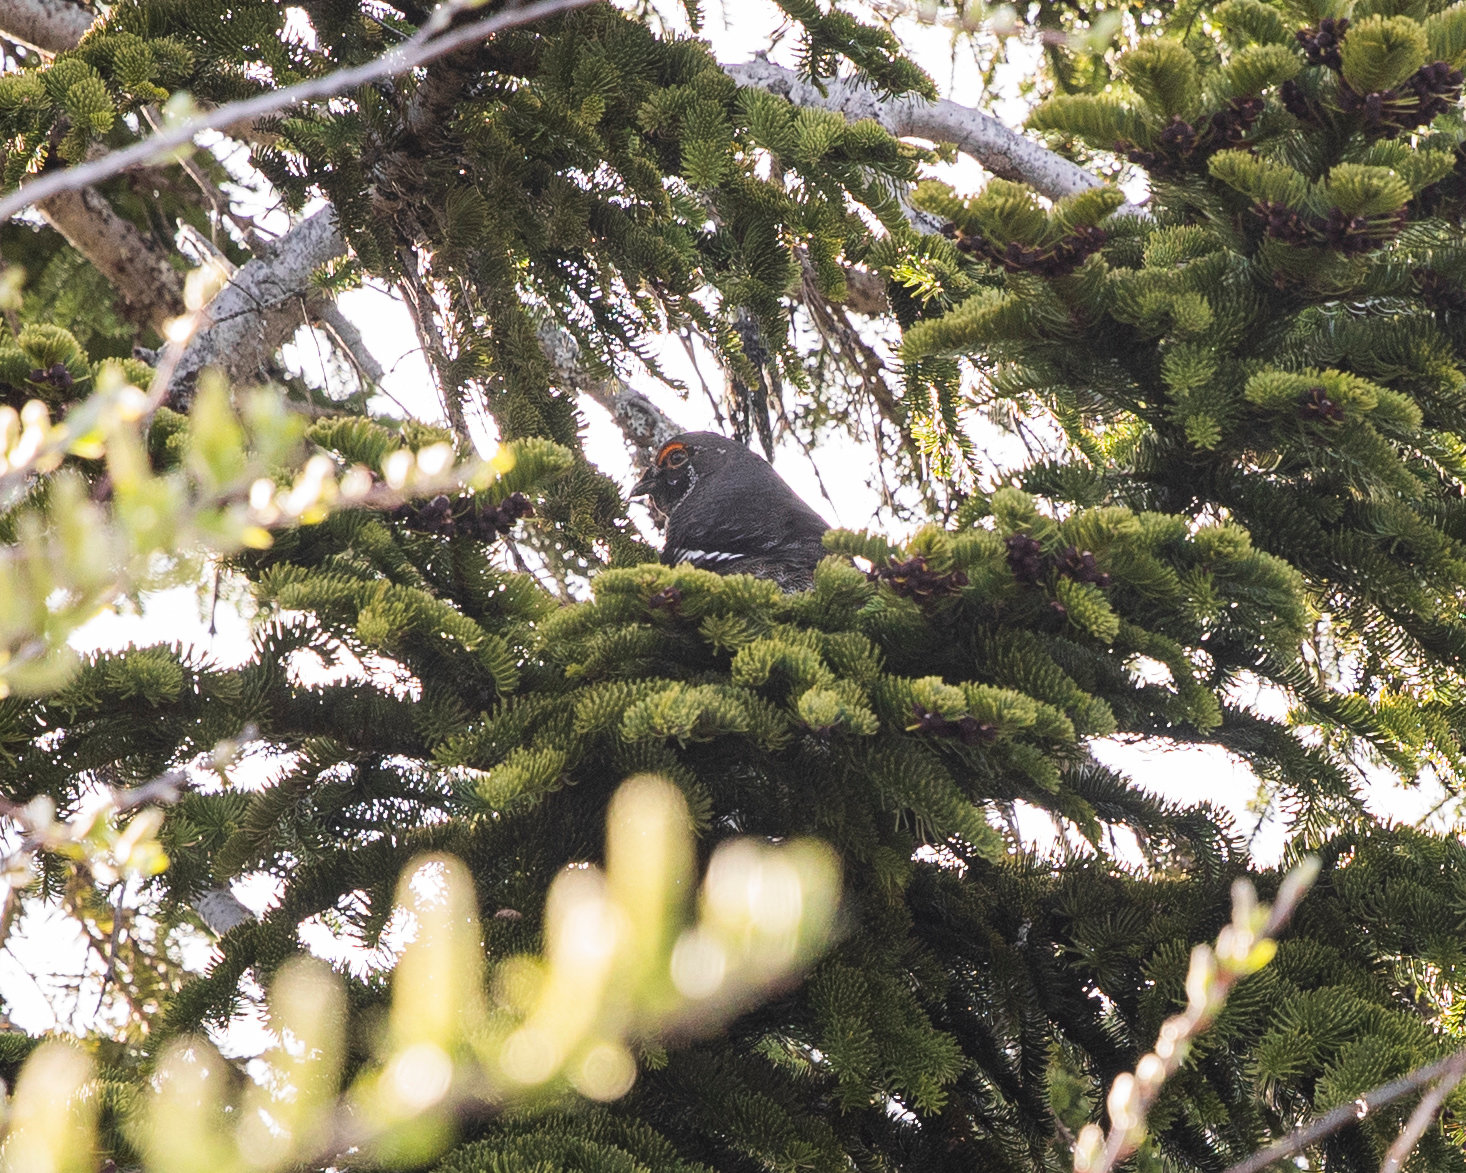 A Spruce Grouse sounds off from a tree near the entrance to the Mount Margaret Backcountry in the Gifford Pinchot National Forest on Wednesday near the Johnston Ridge Observatory.